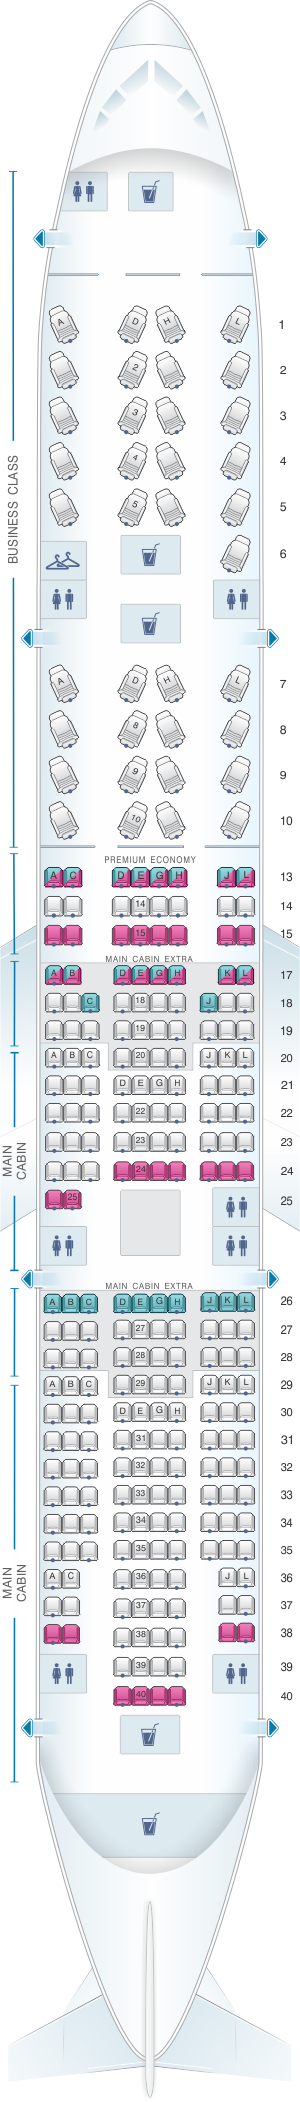 seat map 777 200 american airlines